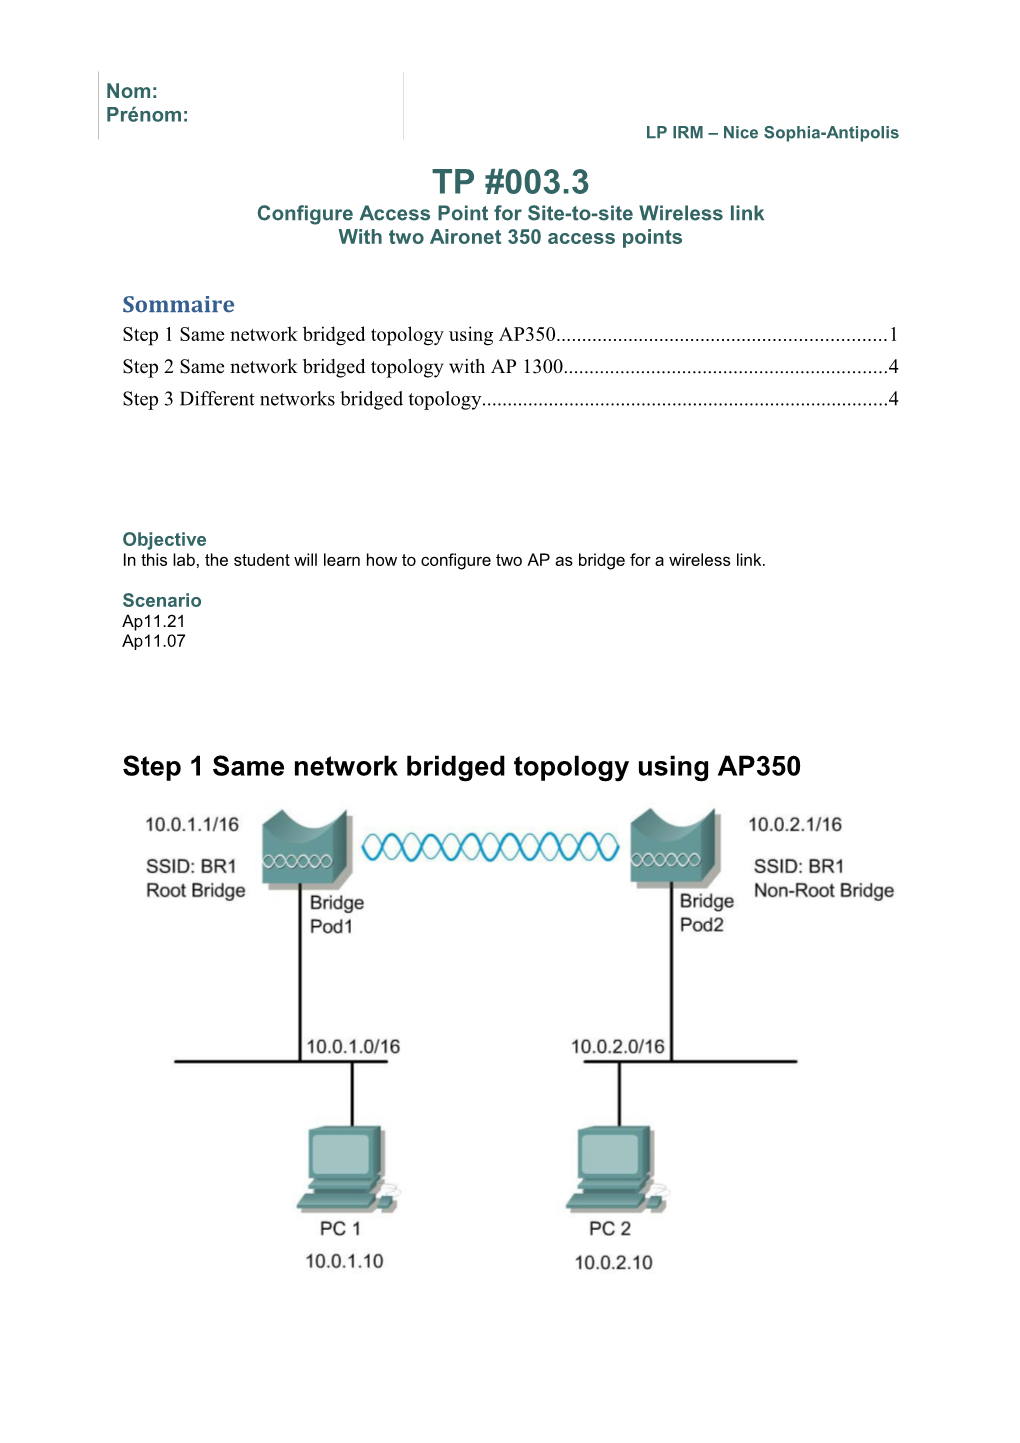 Configure Access Point for Site-To-Site Wireless Link